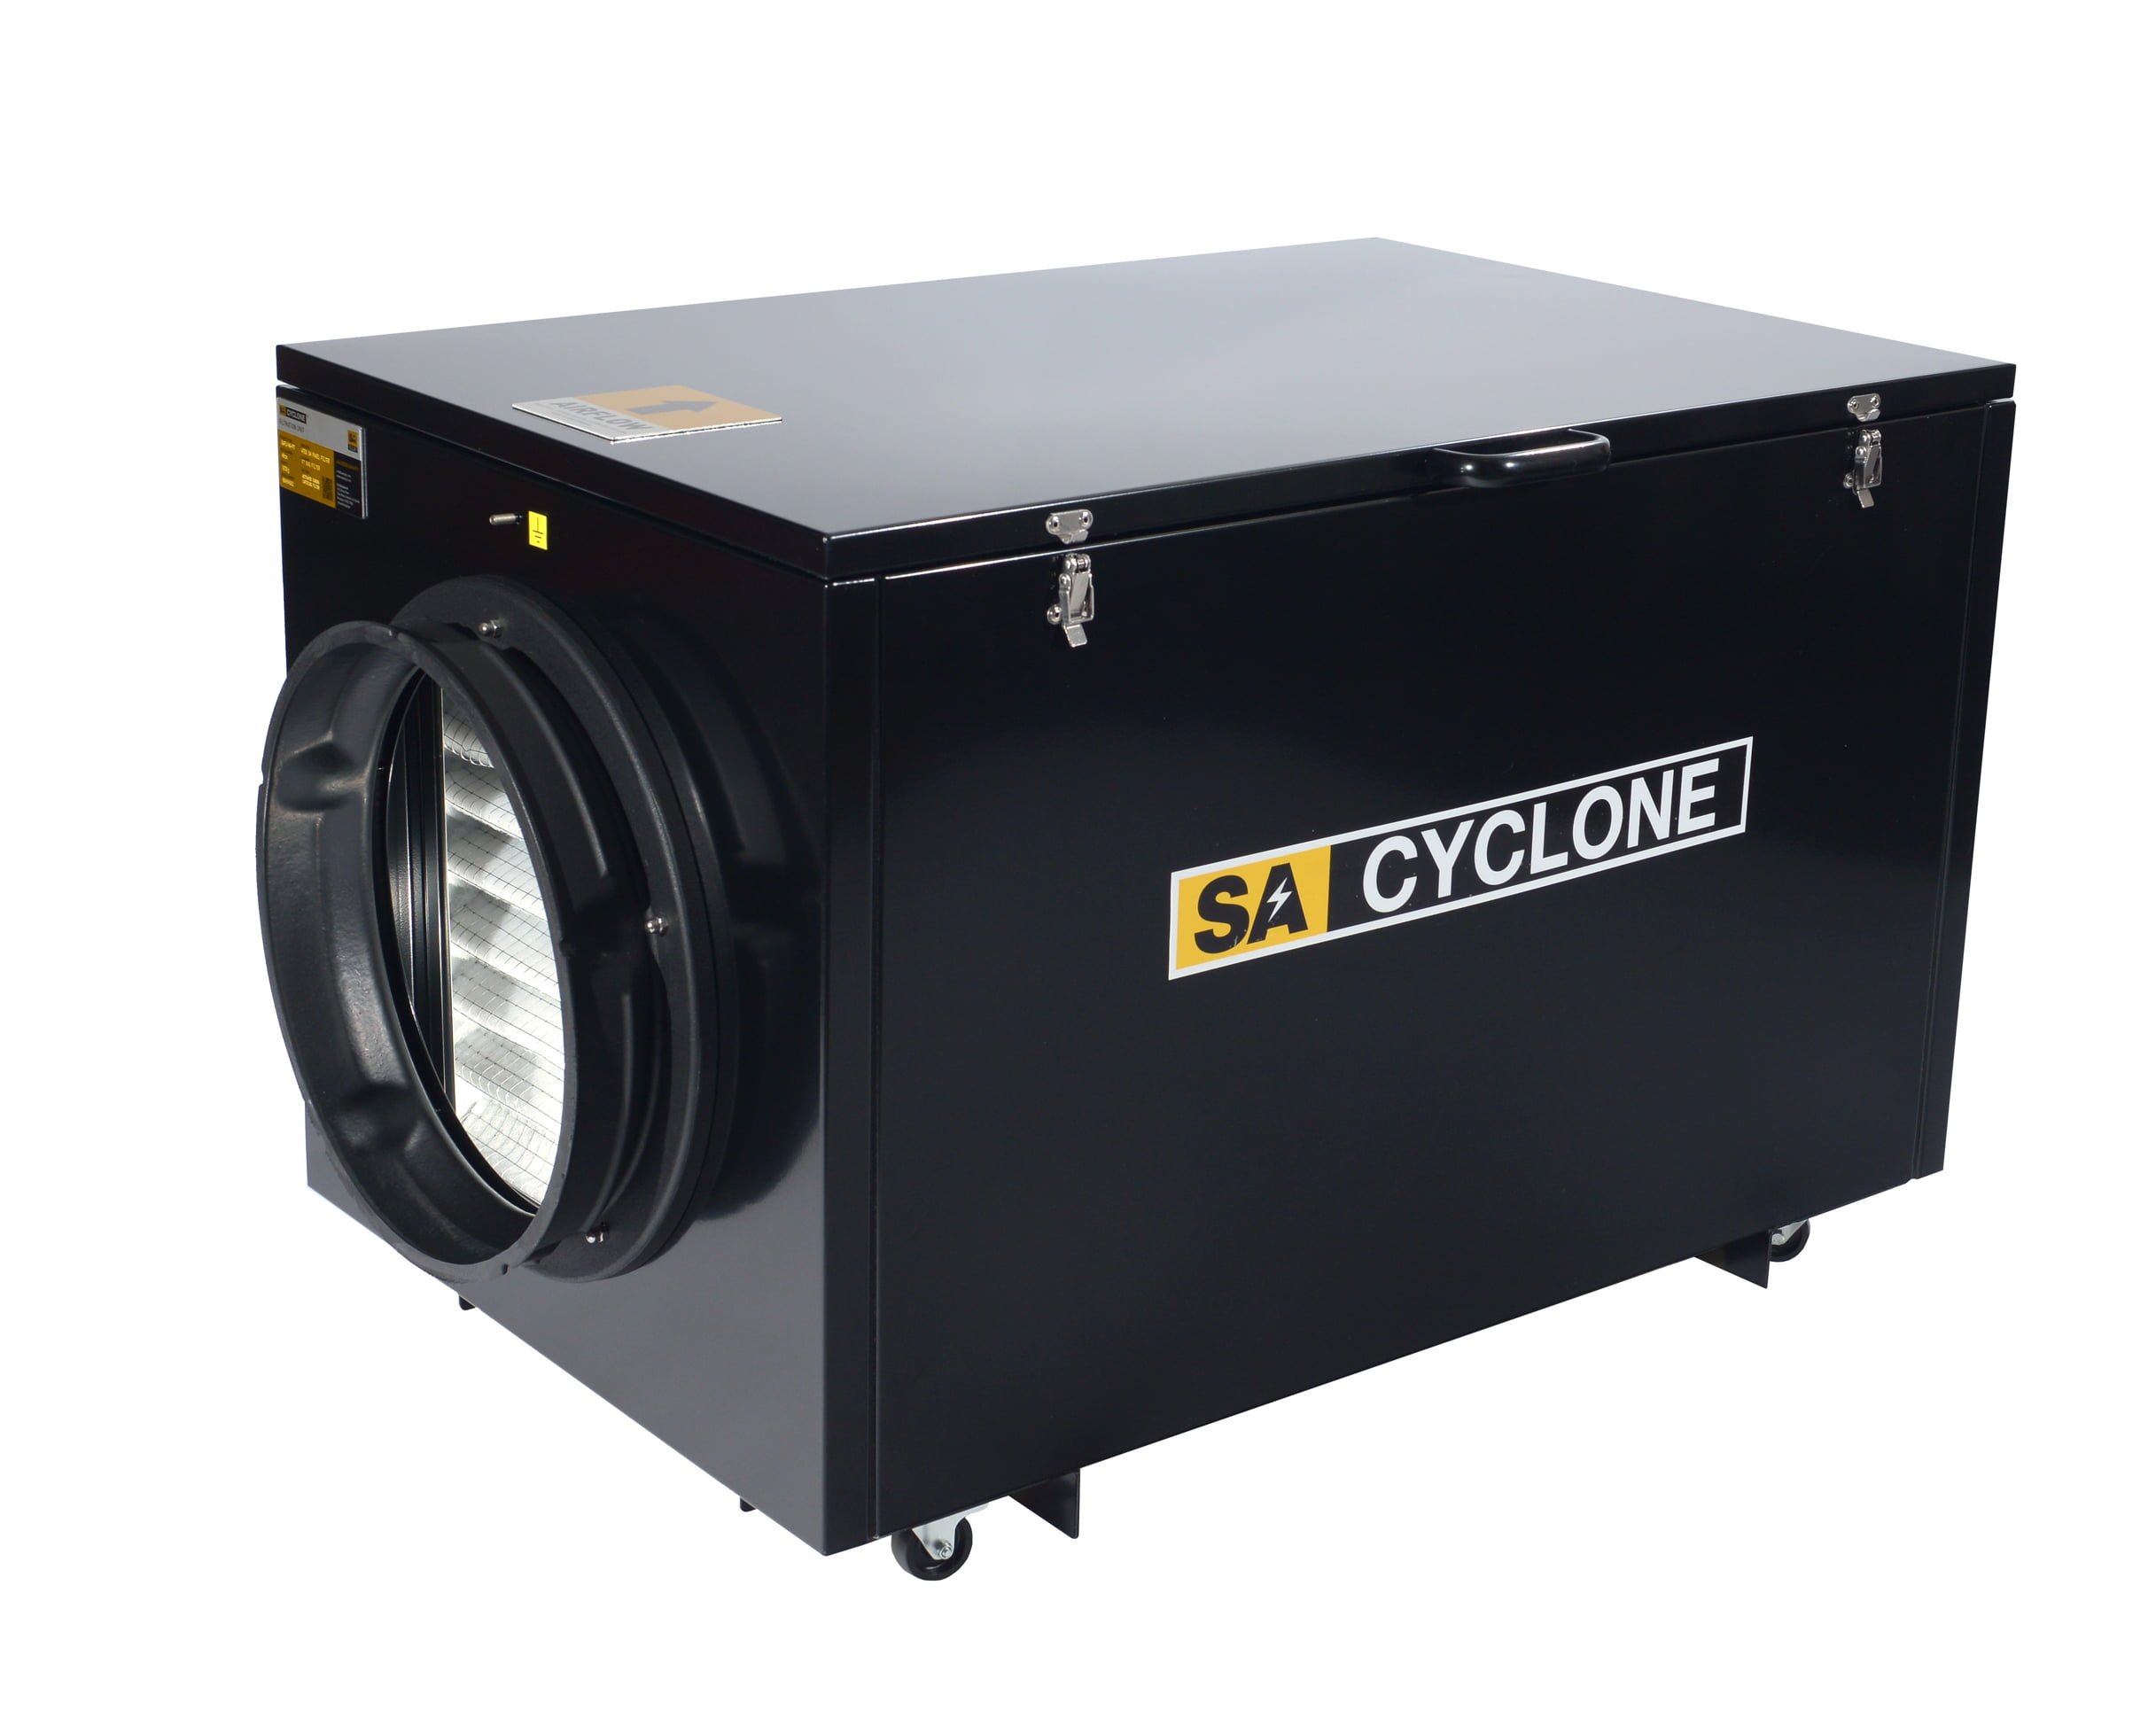 SA CYCLONE Filtration Unit. Applications include Offshore platforms, Oil refineries, Vessels and tanks, Confined spaces, Chemical plants, Shipbuilding and repair and Utilities